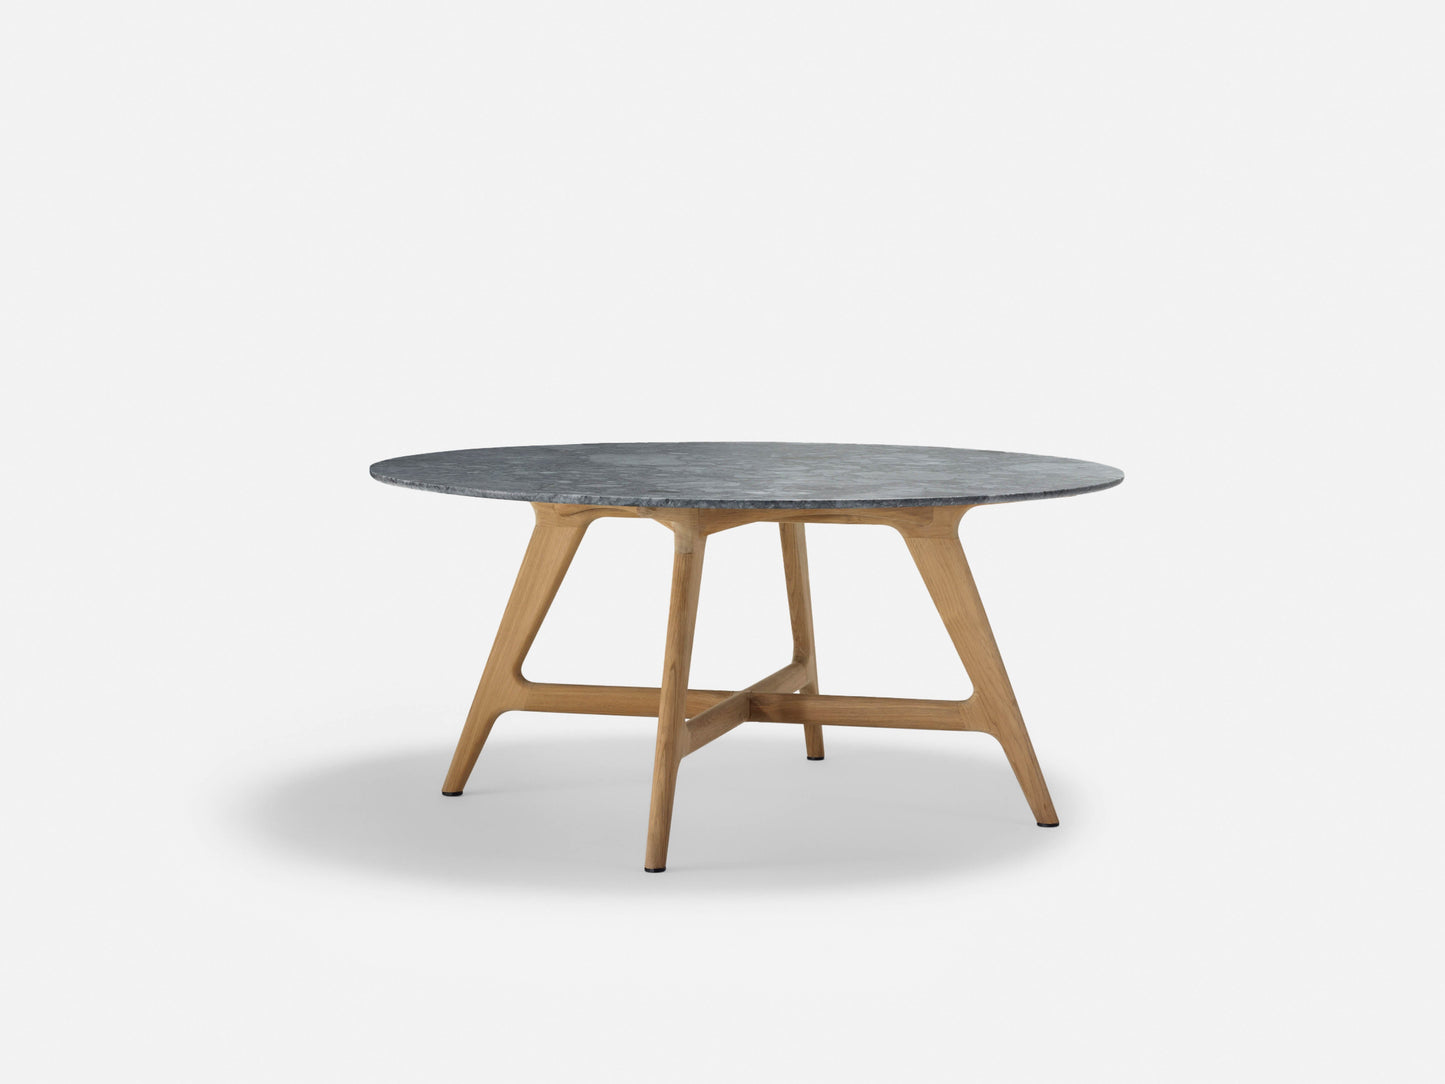 Forrest Round Stone Tables 30% Off Outdoor Furniture Kett 